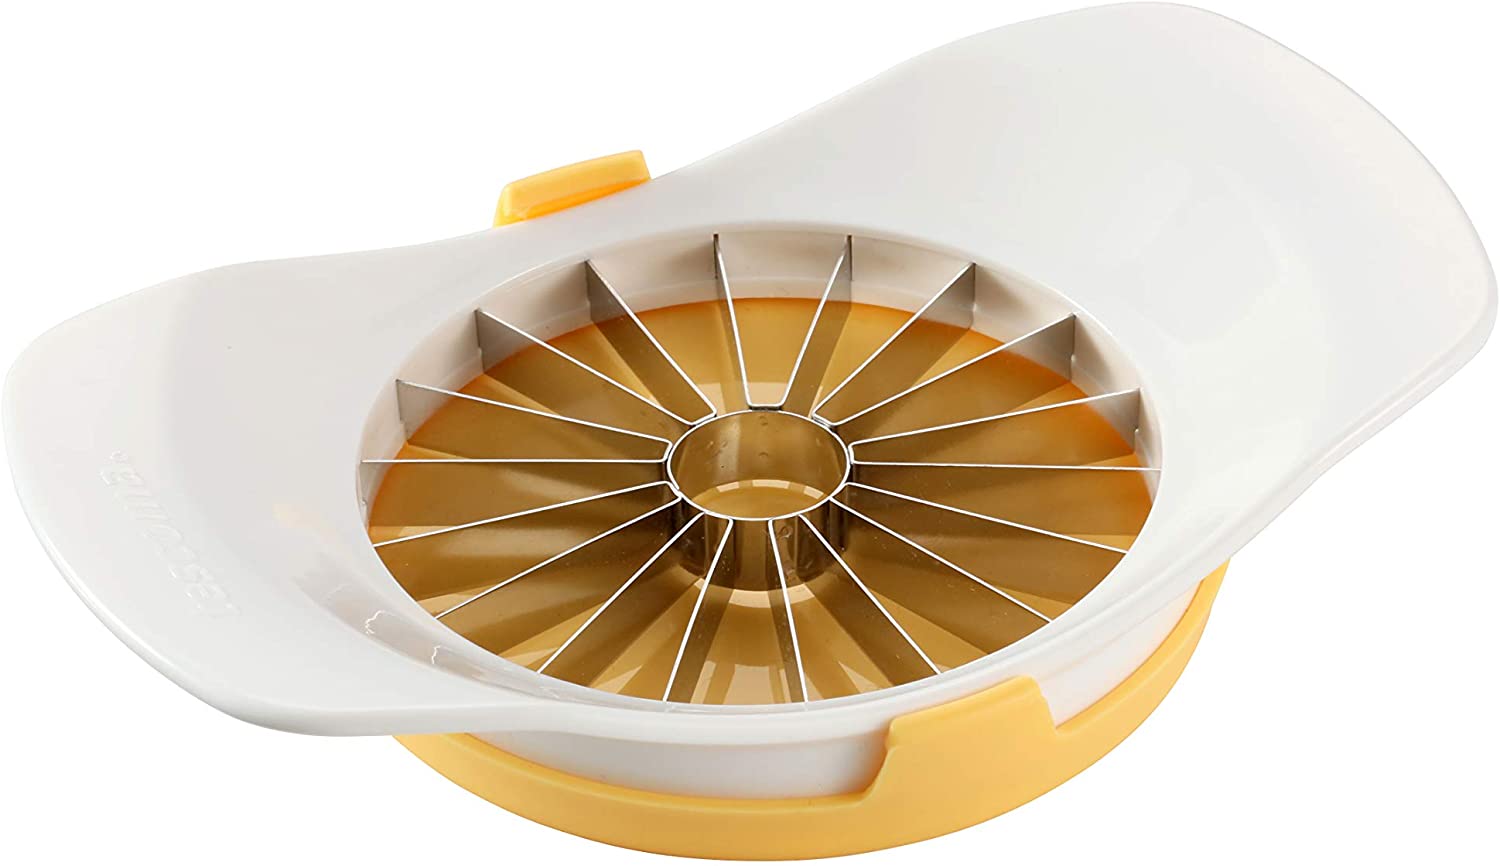 Tescoma Apple Slicer with Blade Protector, Stainless Steel, White/Yellow 21.5 x 14 x 4 cm